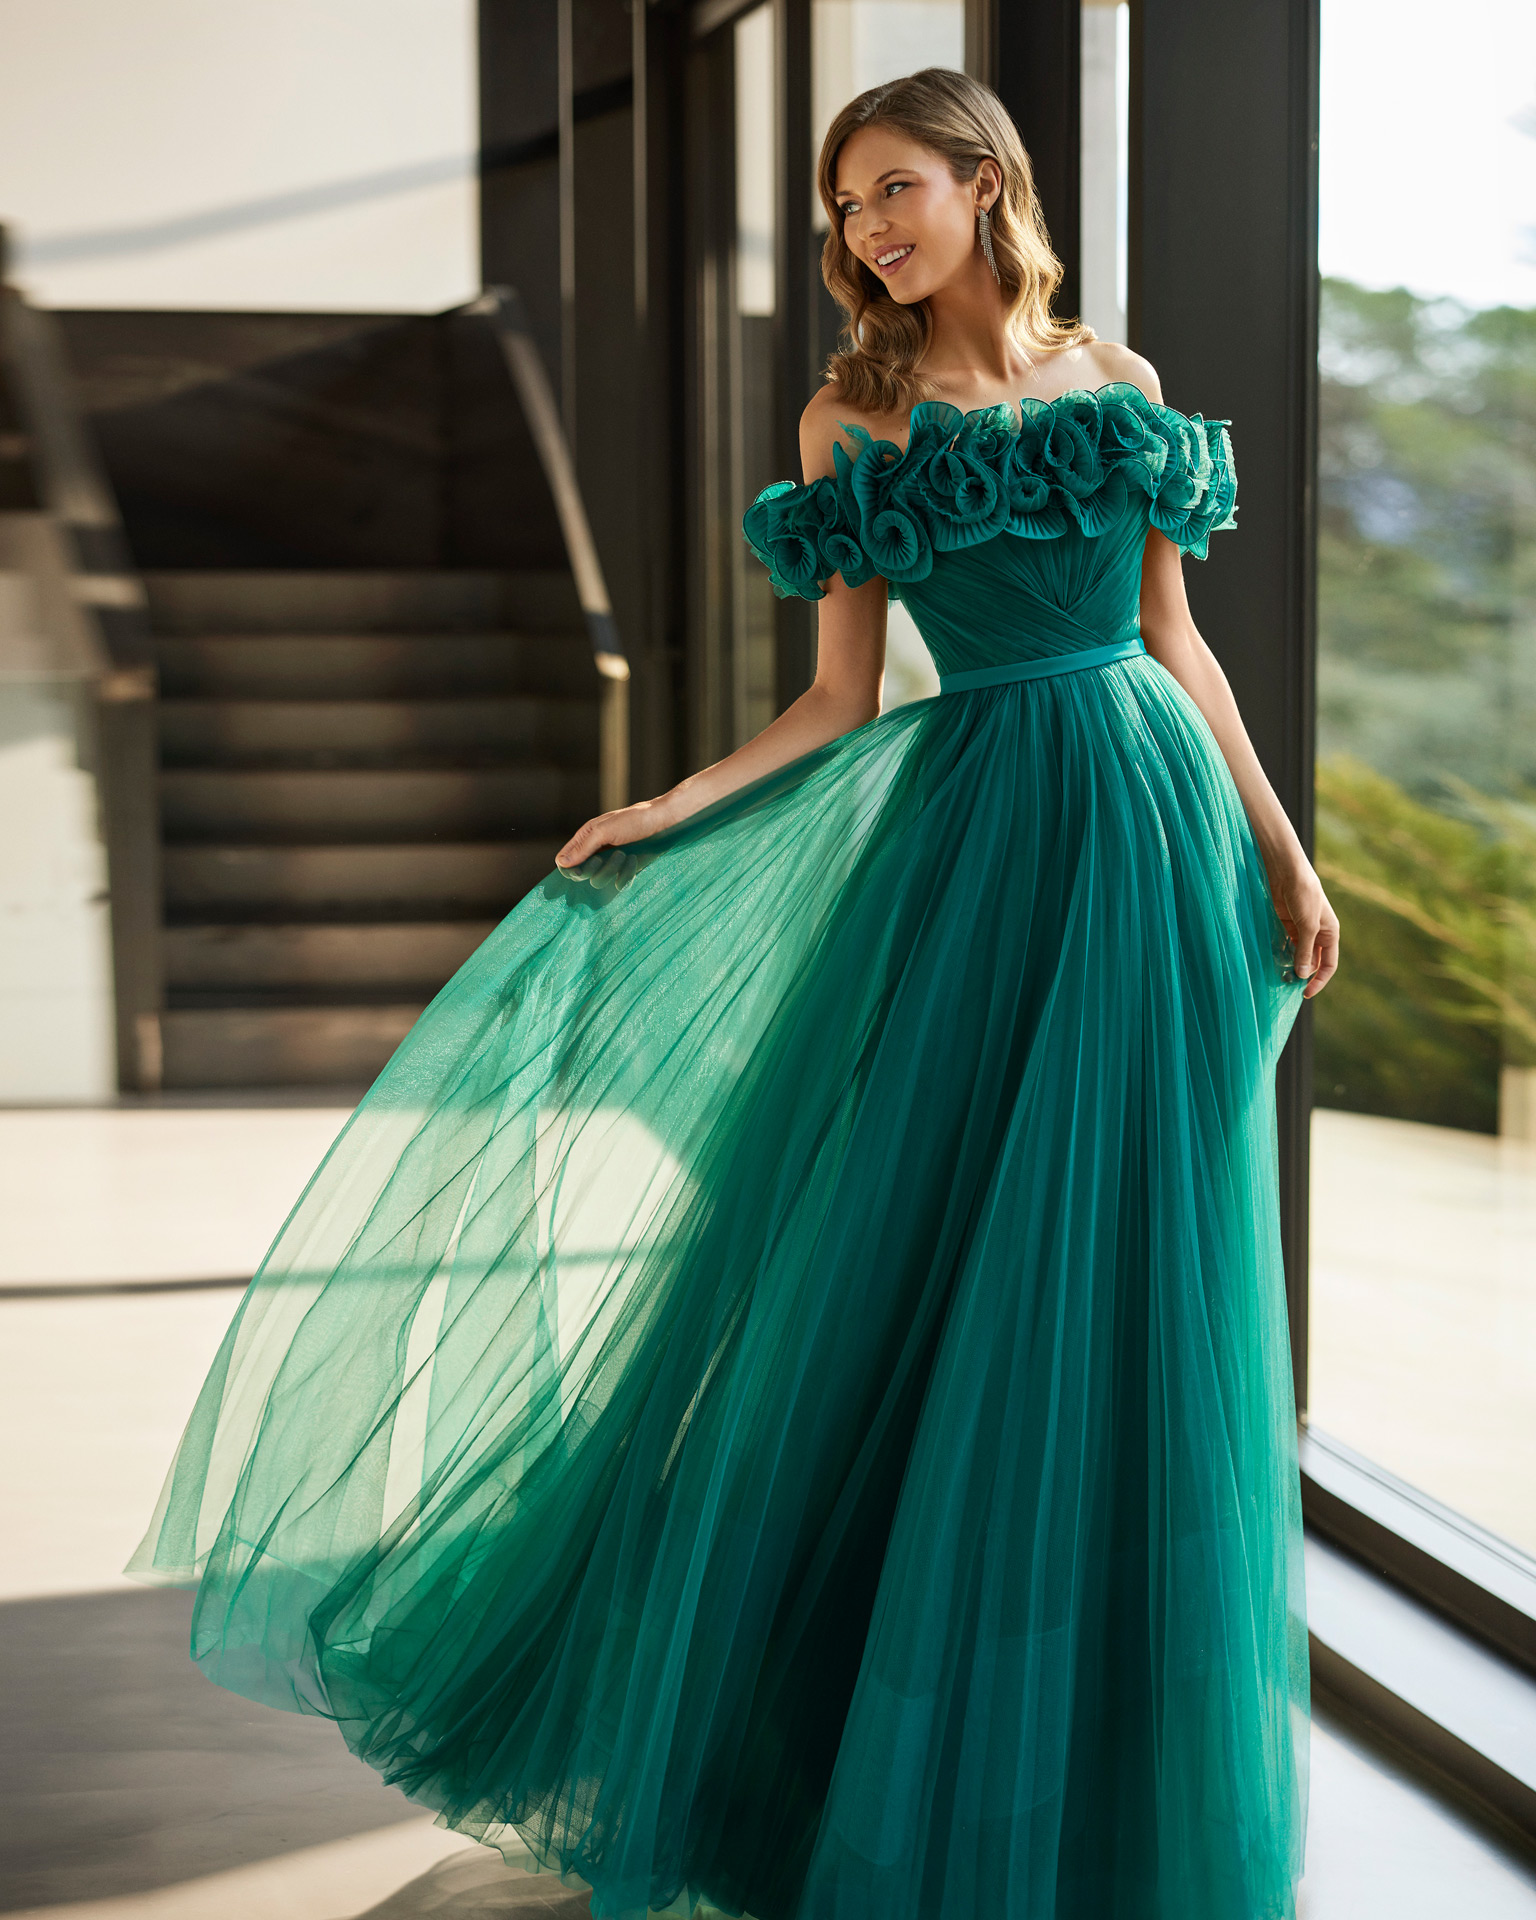 Fairytale style long maid of honour dress. Made with tulle. With off-the-shoulder neckline. Outfit for parties and events. MARFIL_BARCELONA.